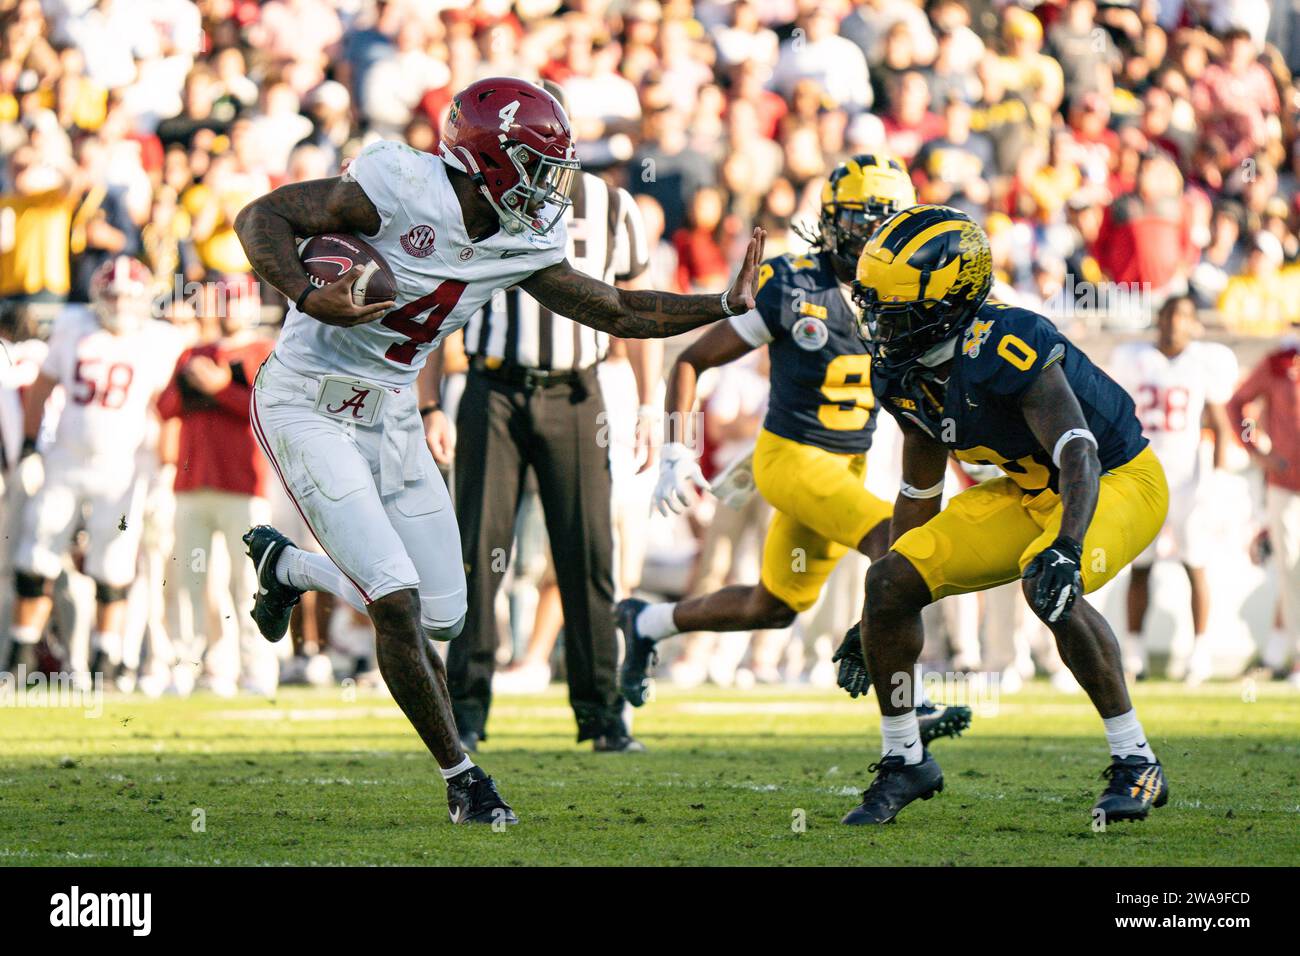 Alabama Crimson Tide quarterback Jalen Milroe (4) runs the ball during the CFP Semifinal at the Rose Bowl Game against the Michigan Wolverines, Monday Stock Photo